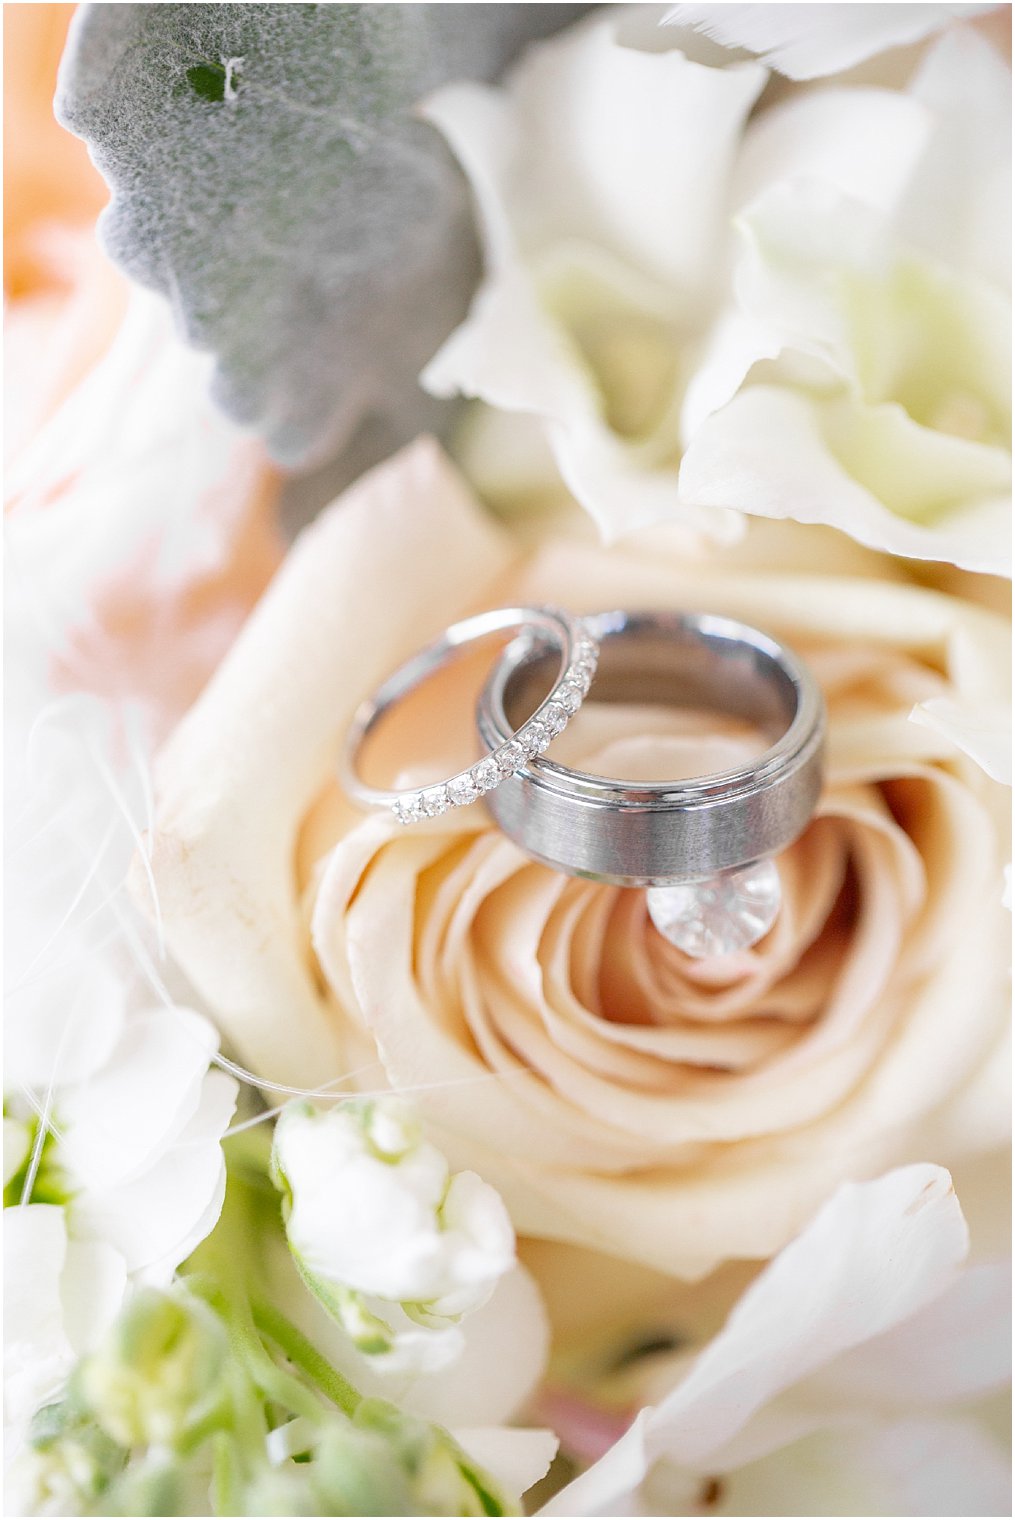 wedding bands on peach rose photographed by NJ wedding photographer Idalia Photography